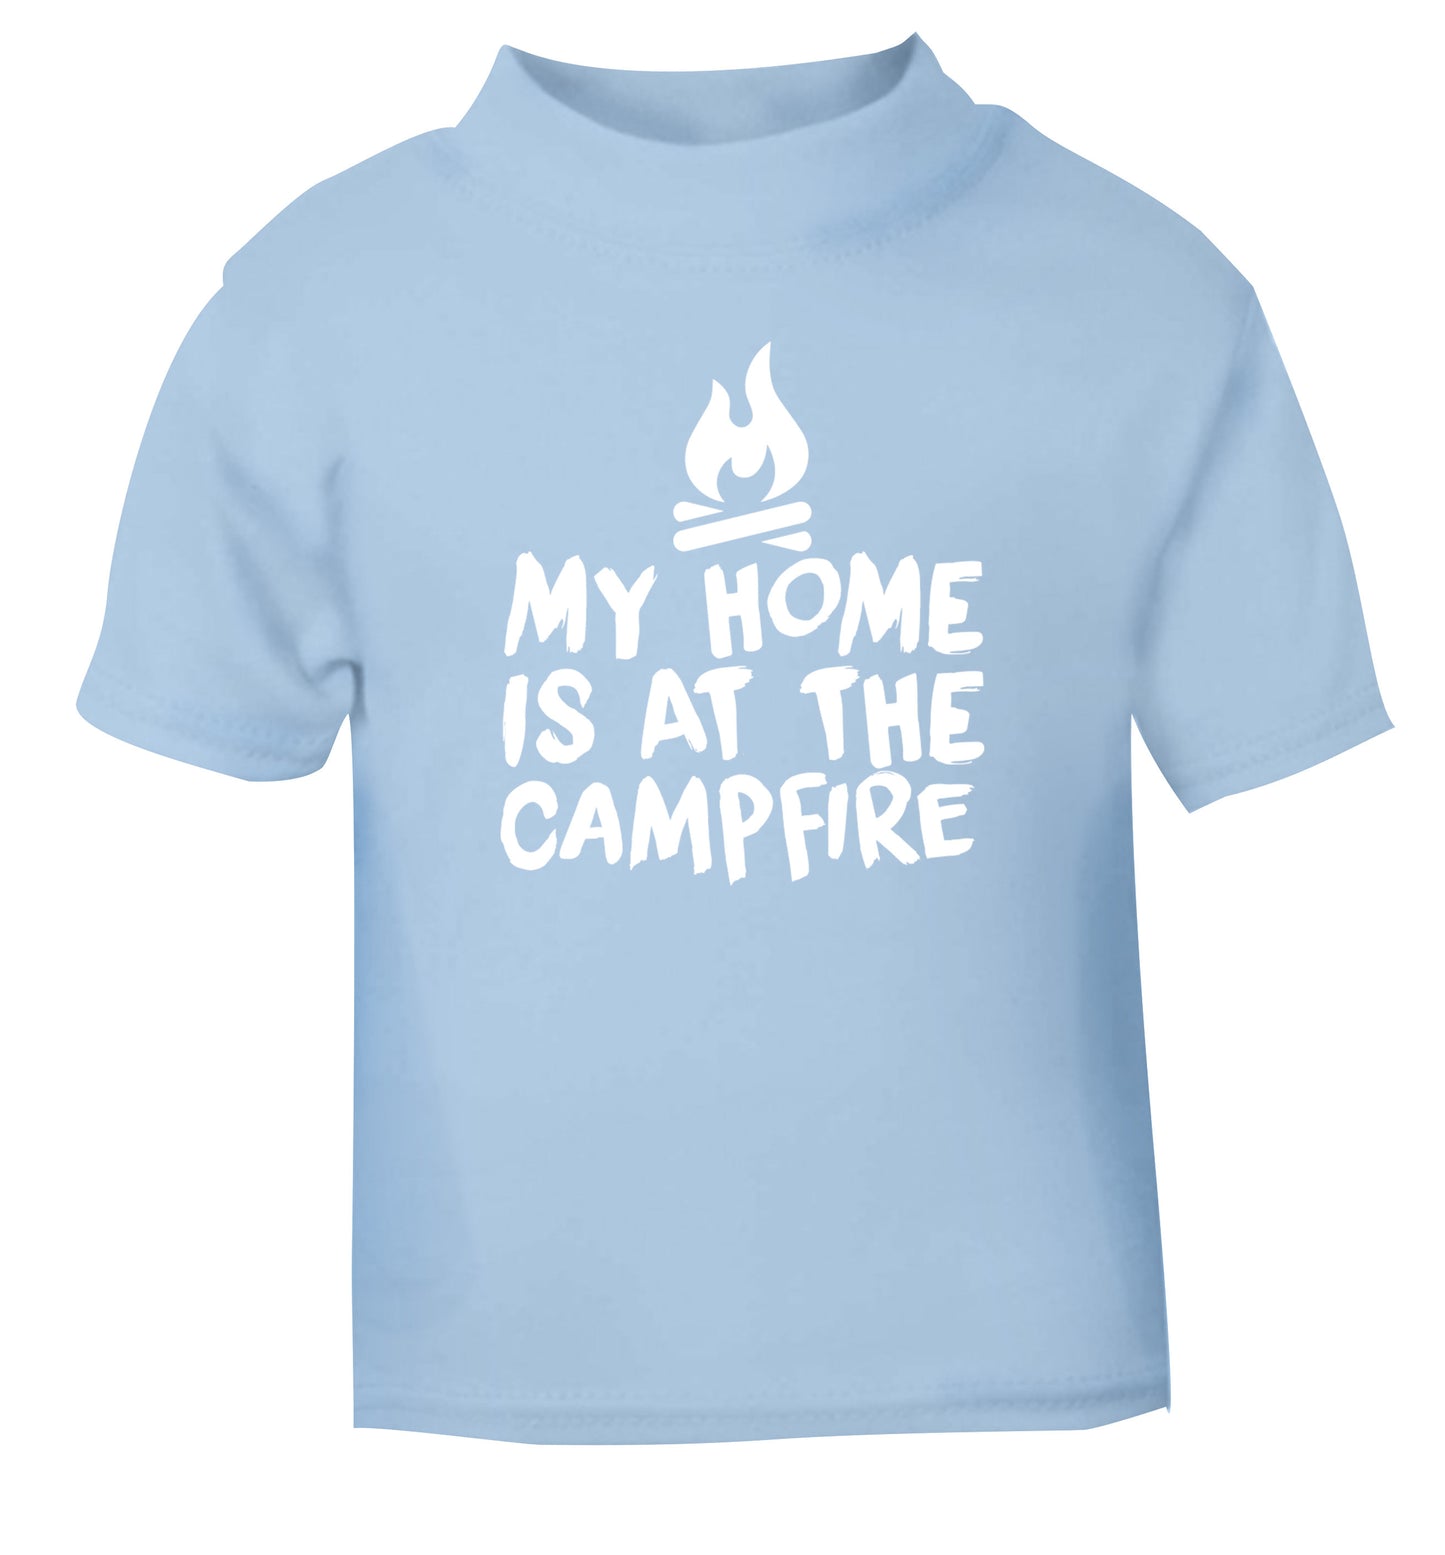 My home is at the campfire light blue Baby Toddler Tshirt 2 Years